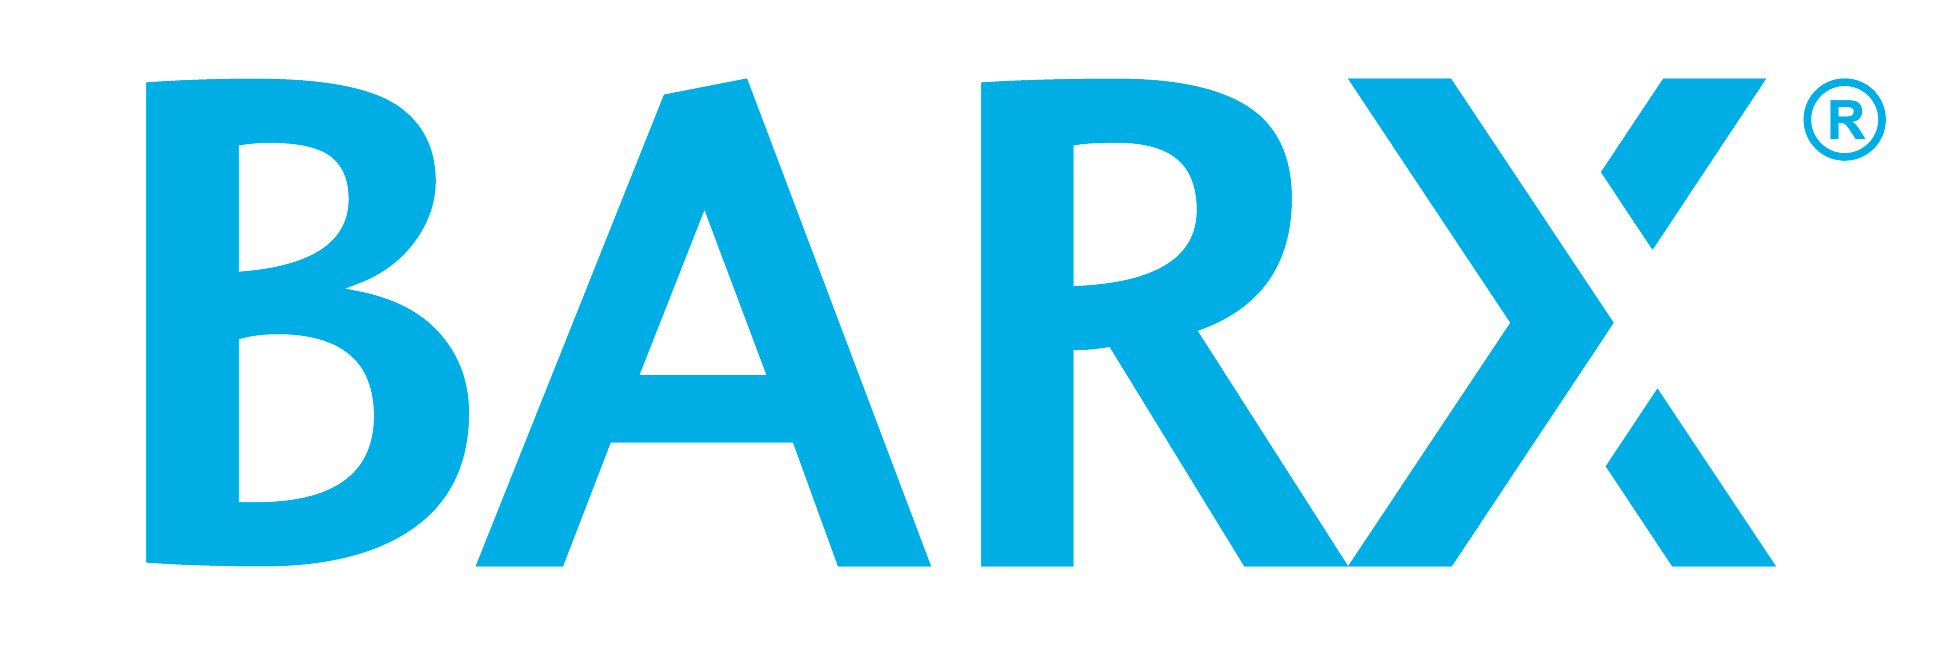 Barclays Introduces BARX® as Its Cross-Asset Electronic Trading ...